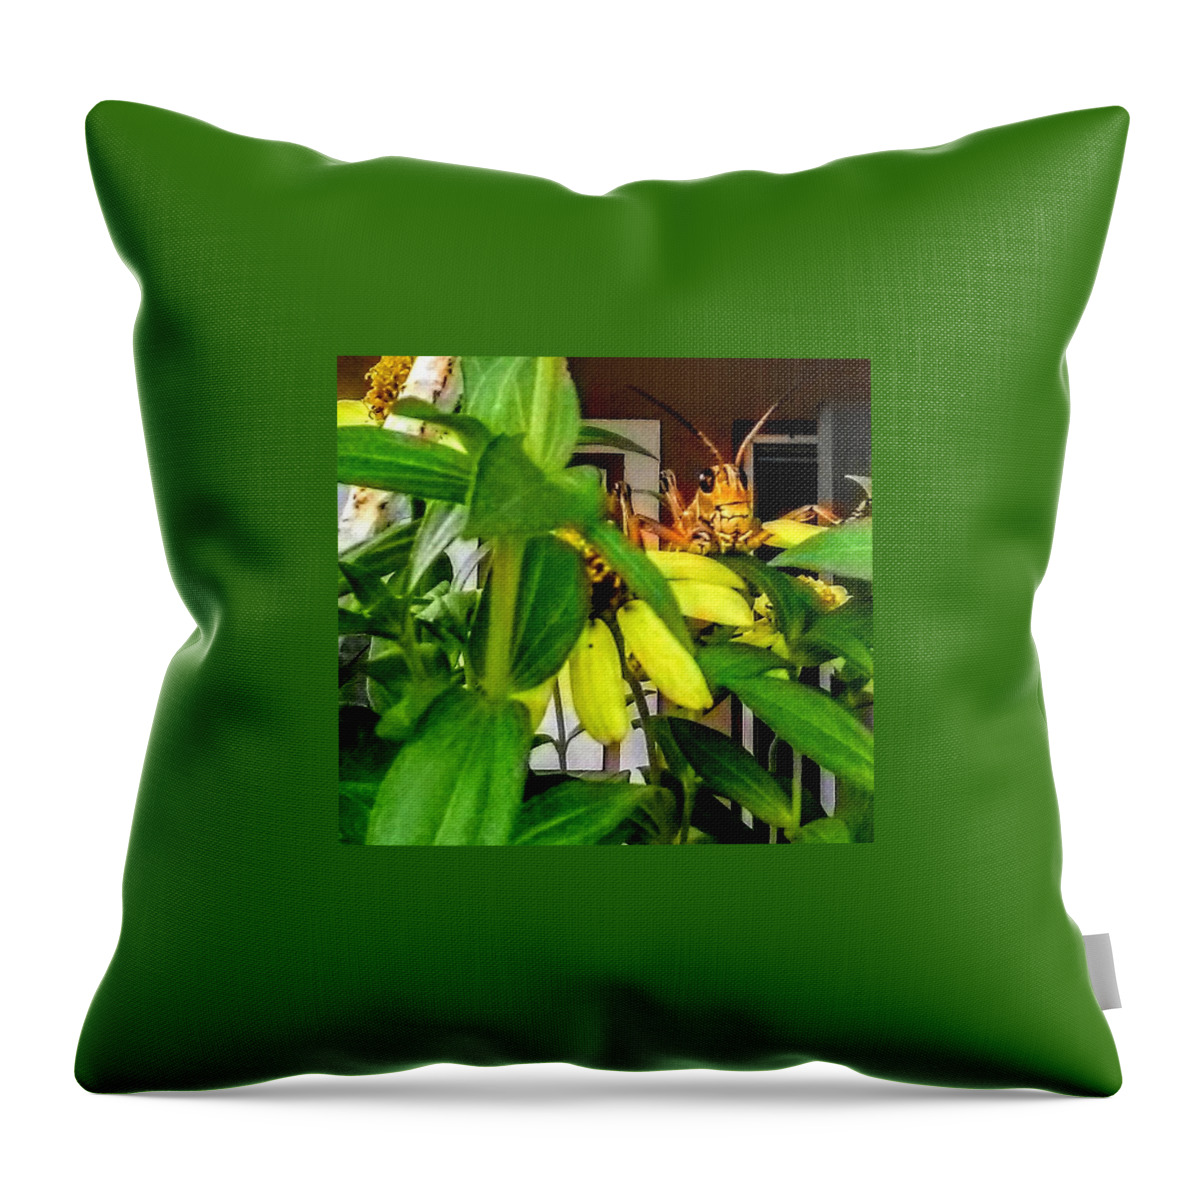 Insect Throw Pillow featuring the photograph Morning Visitor by Suzanne Berthier